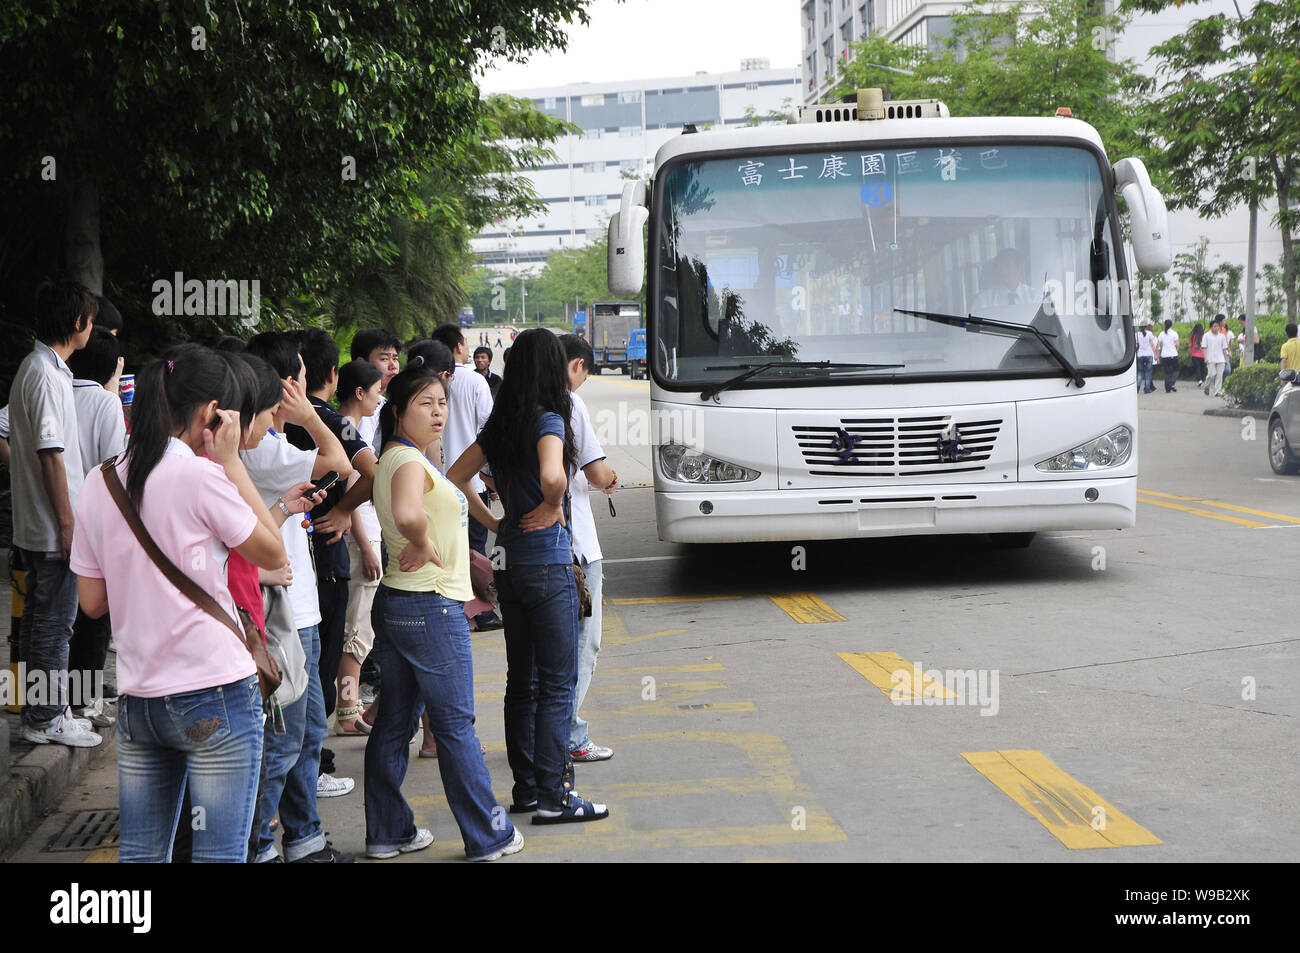 Chinese Foxconn employees wait for a shuttle bus in the Shenzhen plant of Foxconn Technology Group in Shenzhen city, south Chinas Guangdong province, Stock Photo